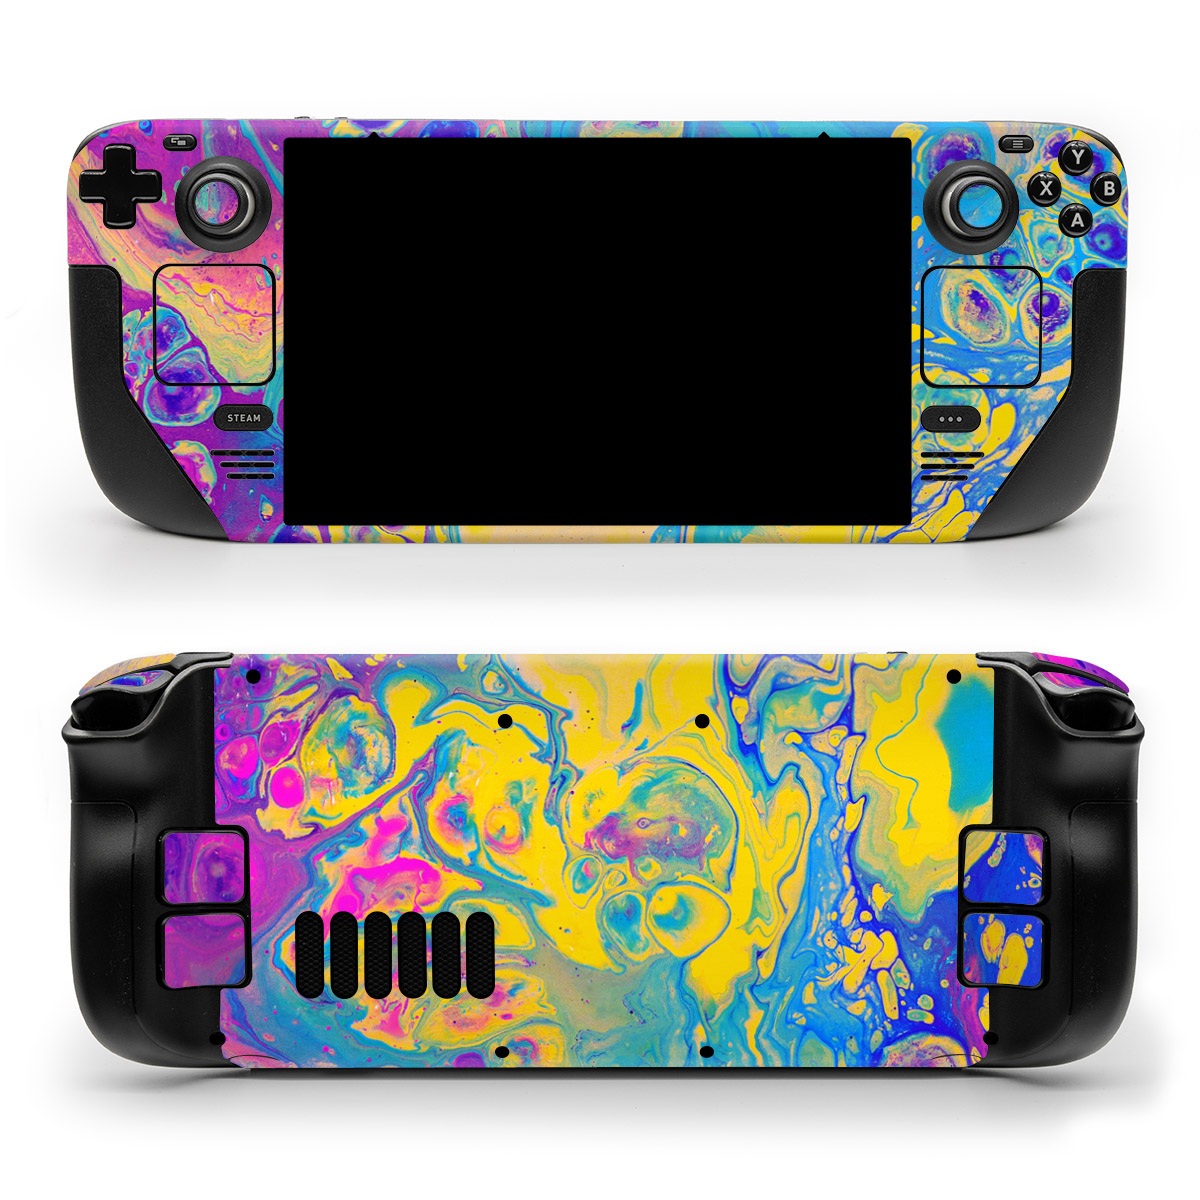 Valve Steam Deck Skin design of Psychedelic art, Pattern, Purple, Visual arts, Design, Art, Fractal art, Electric blue, Graphic design, Graphics, with blue, yellow, purple, pink colors